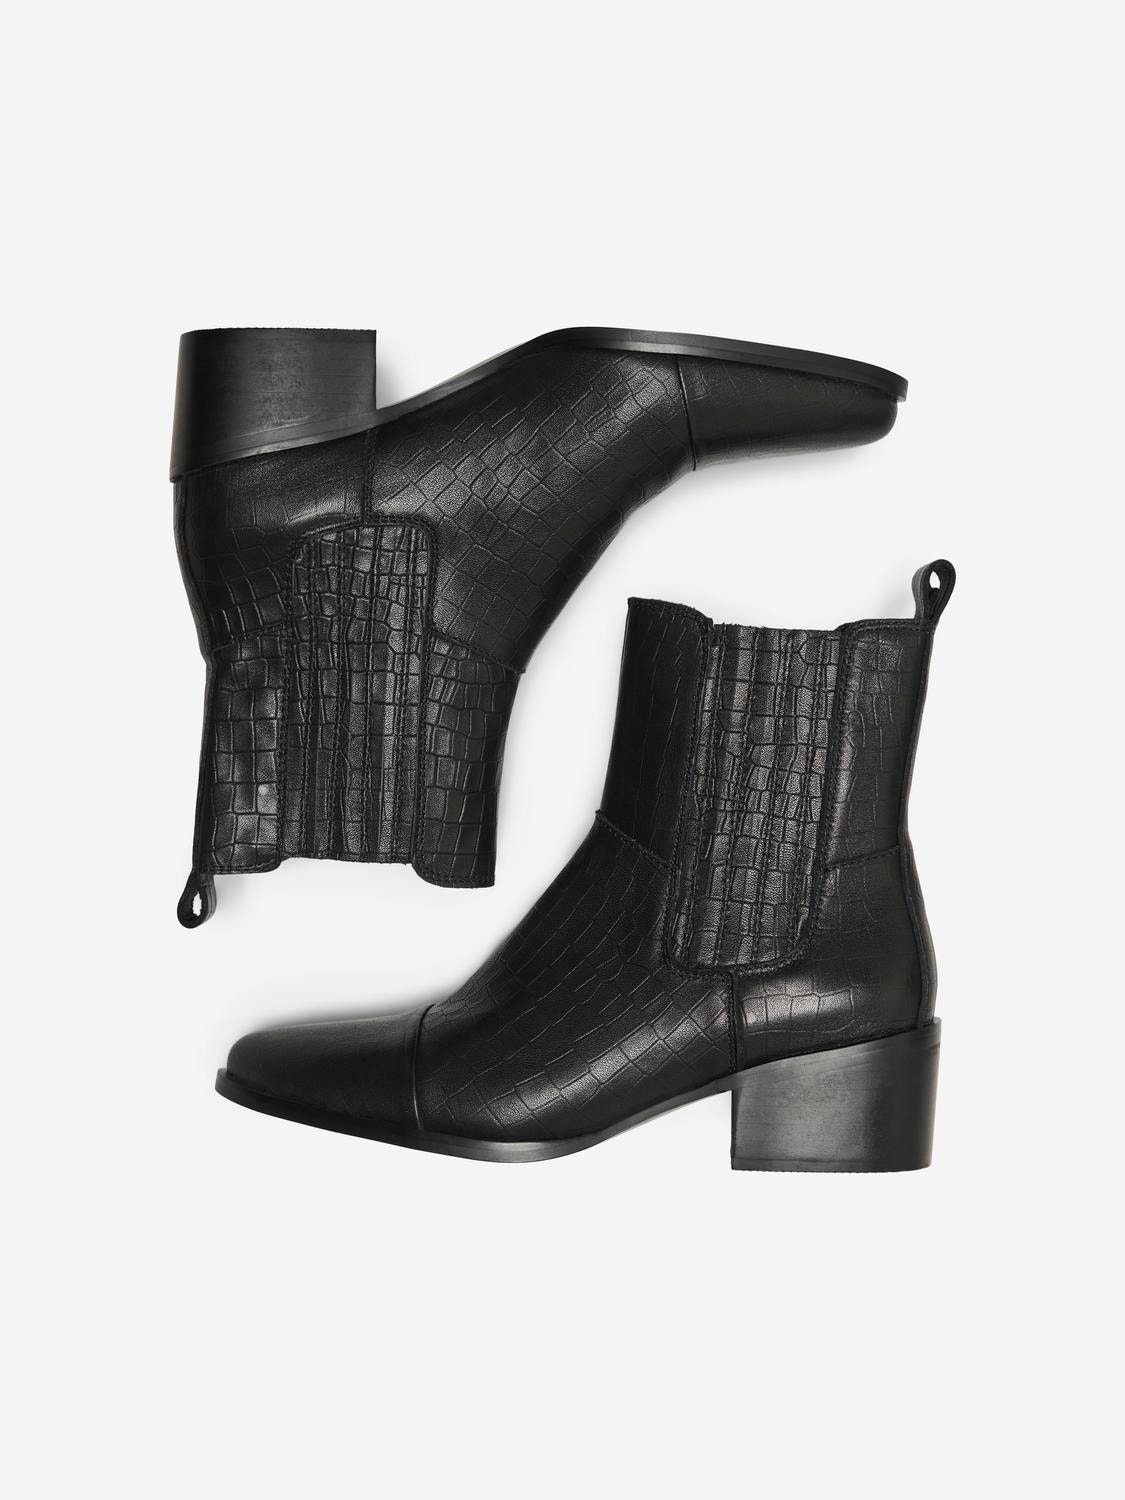 ONLY Bottes Bout pointu -Black - 15287520